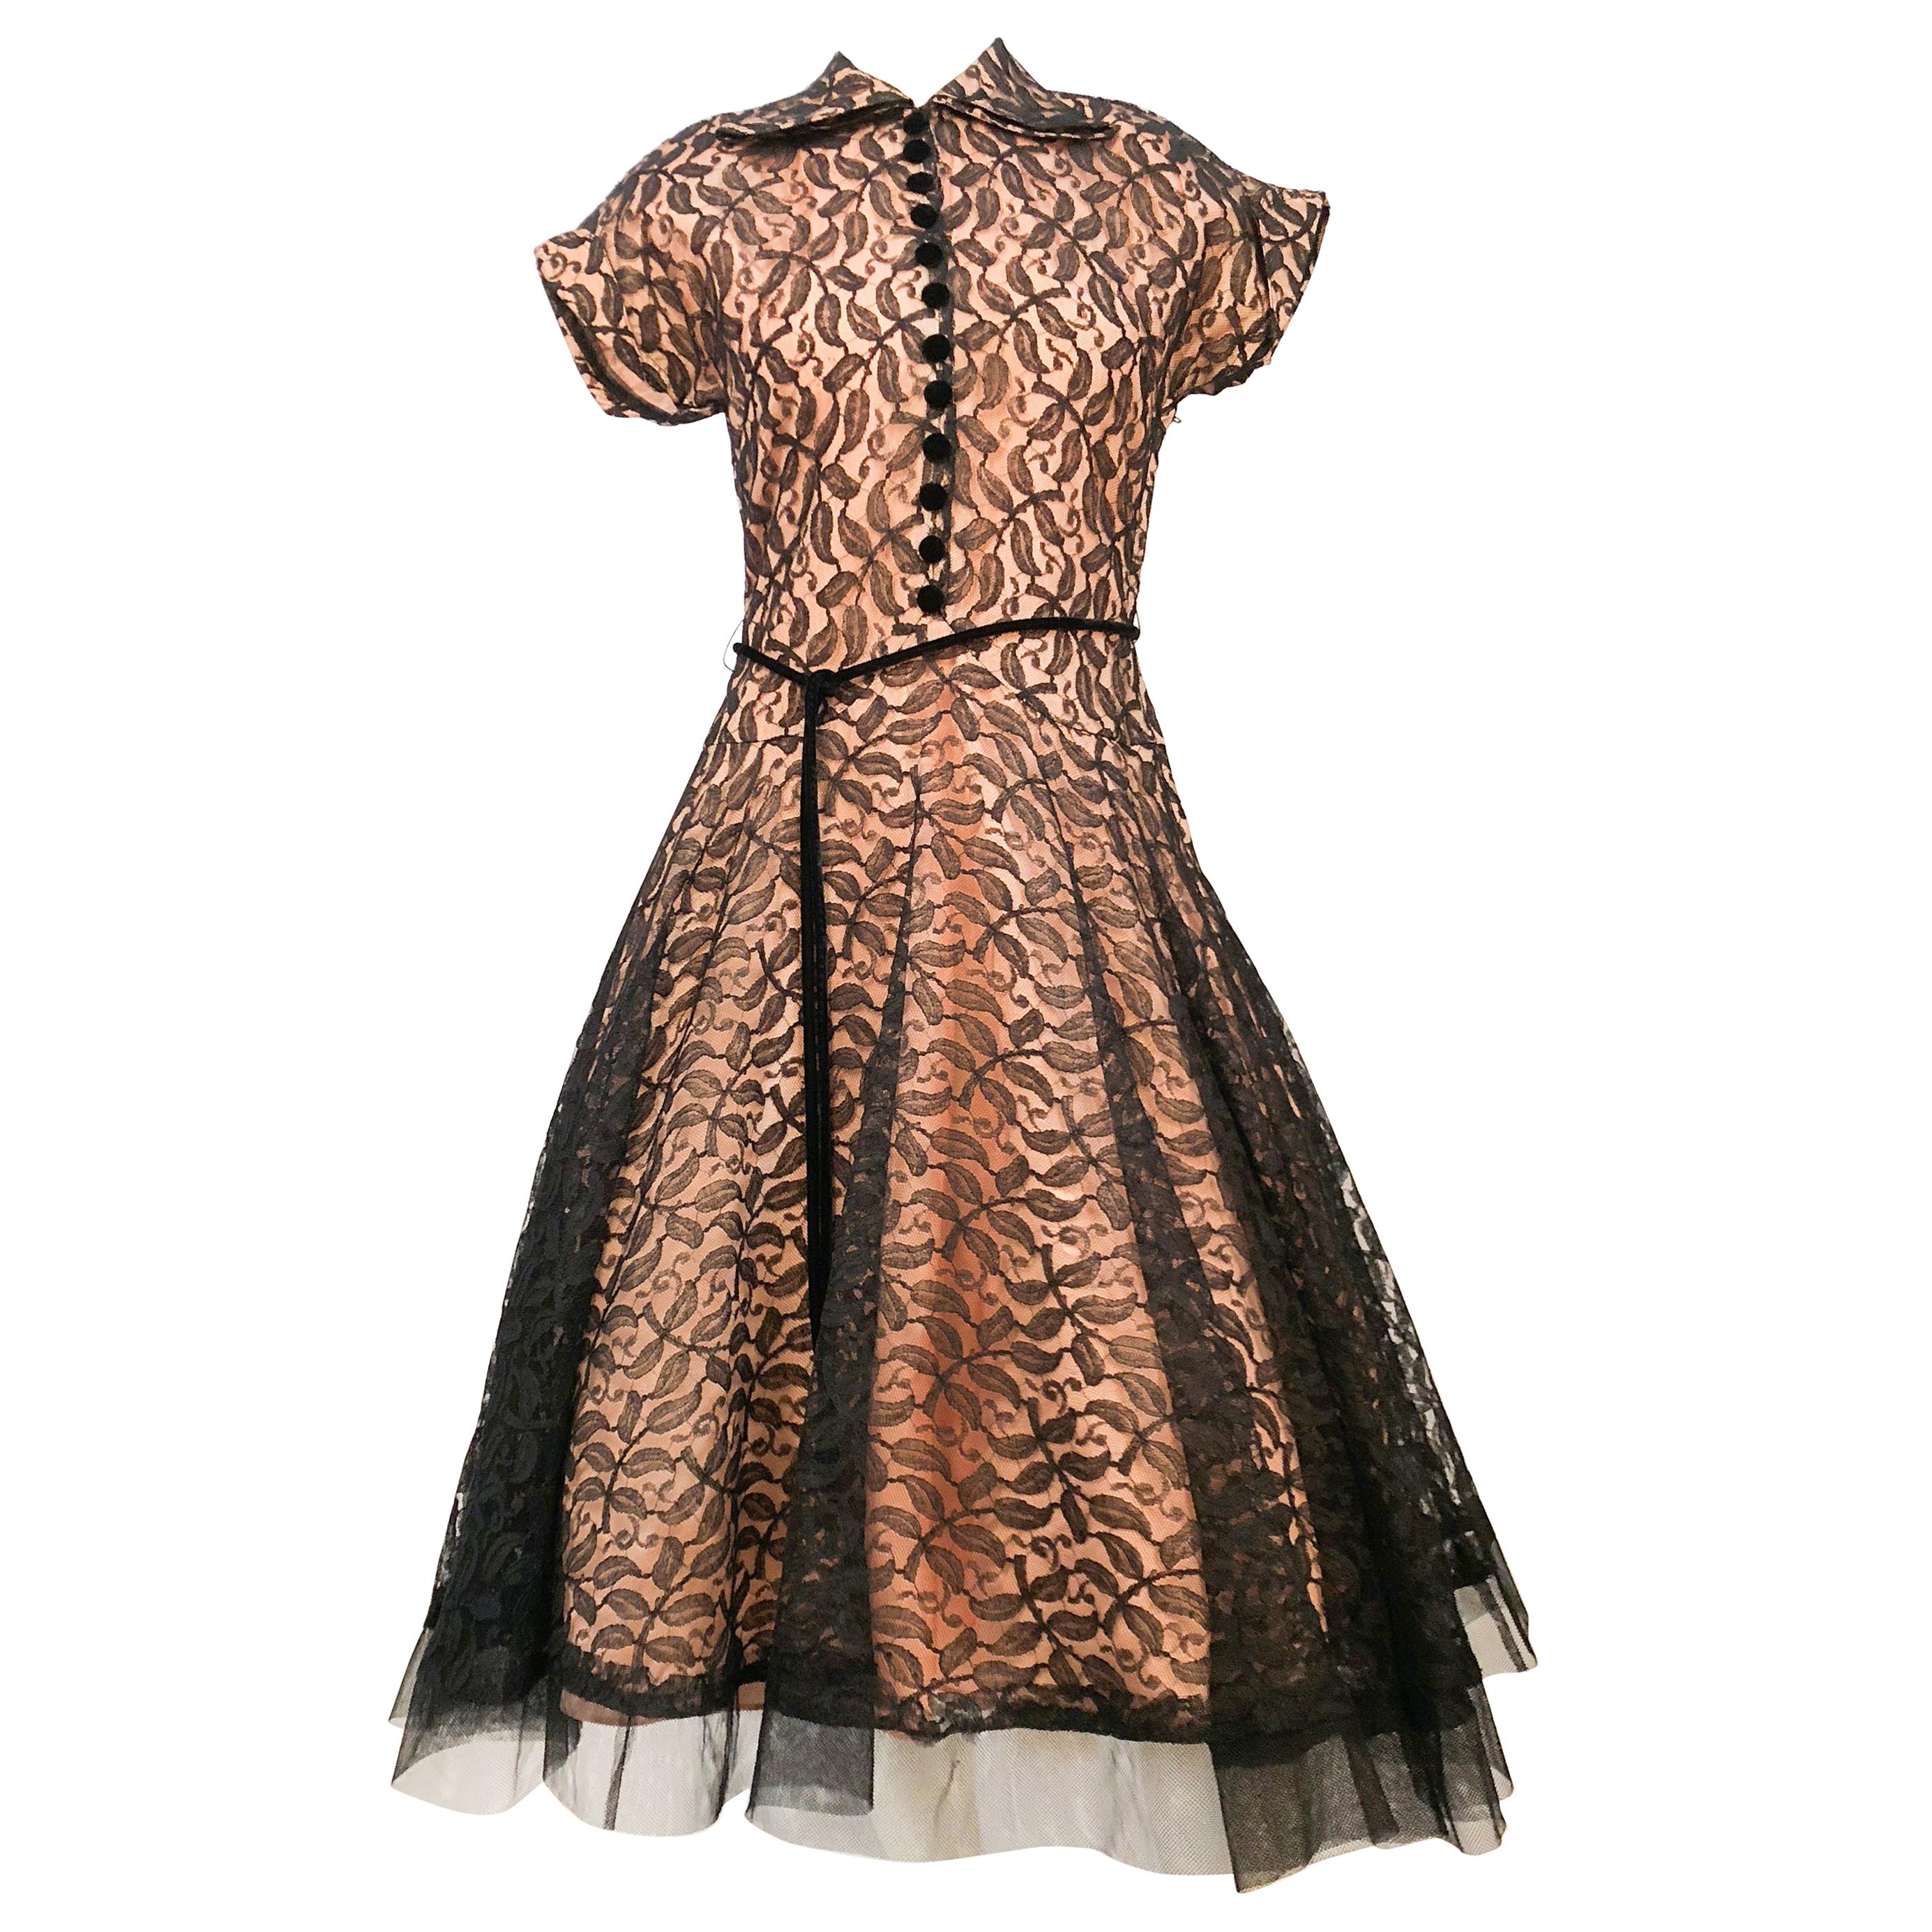 1950's Black Lace Dress with Blush-Colored lining and Velvet Accents For Sale